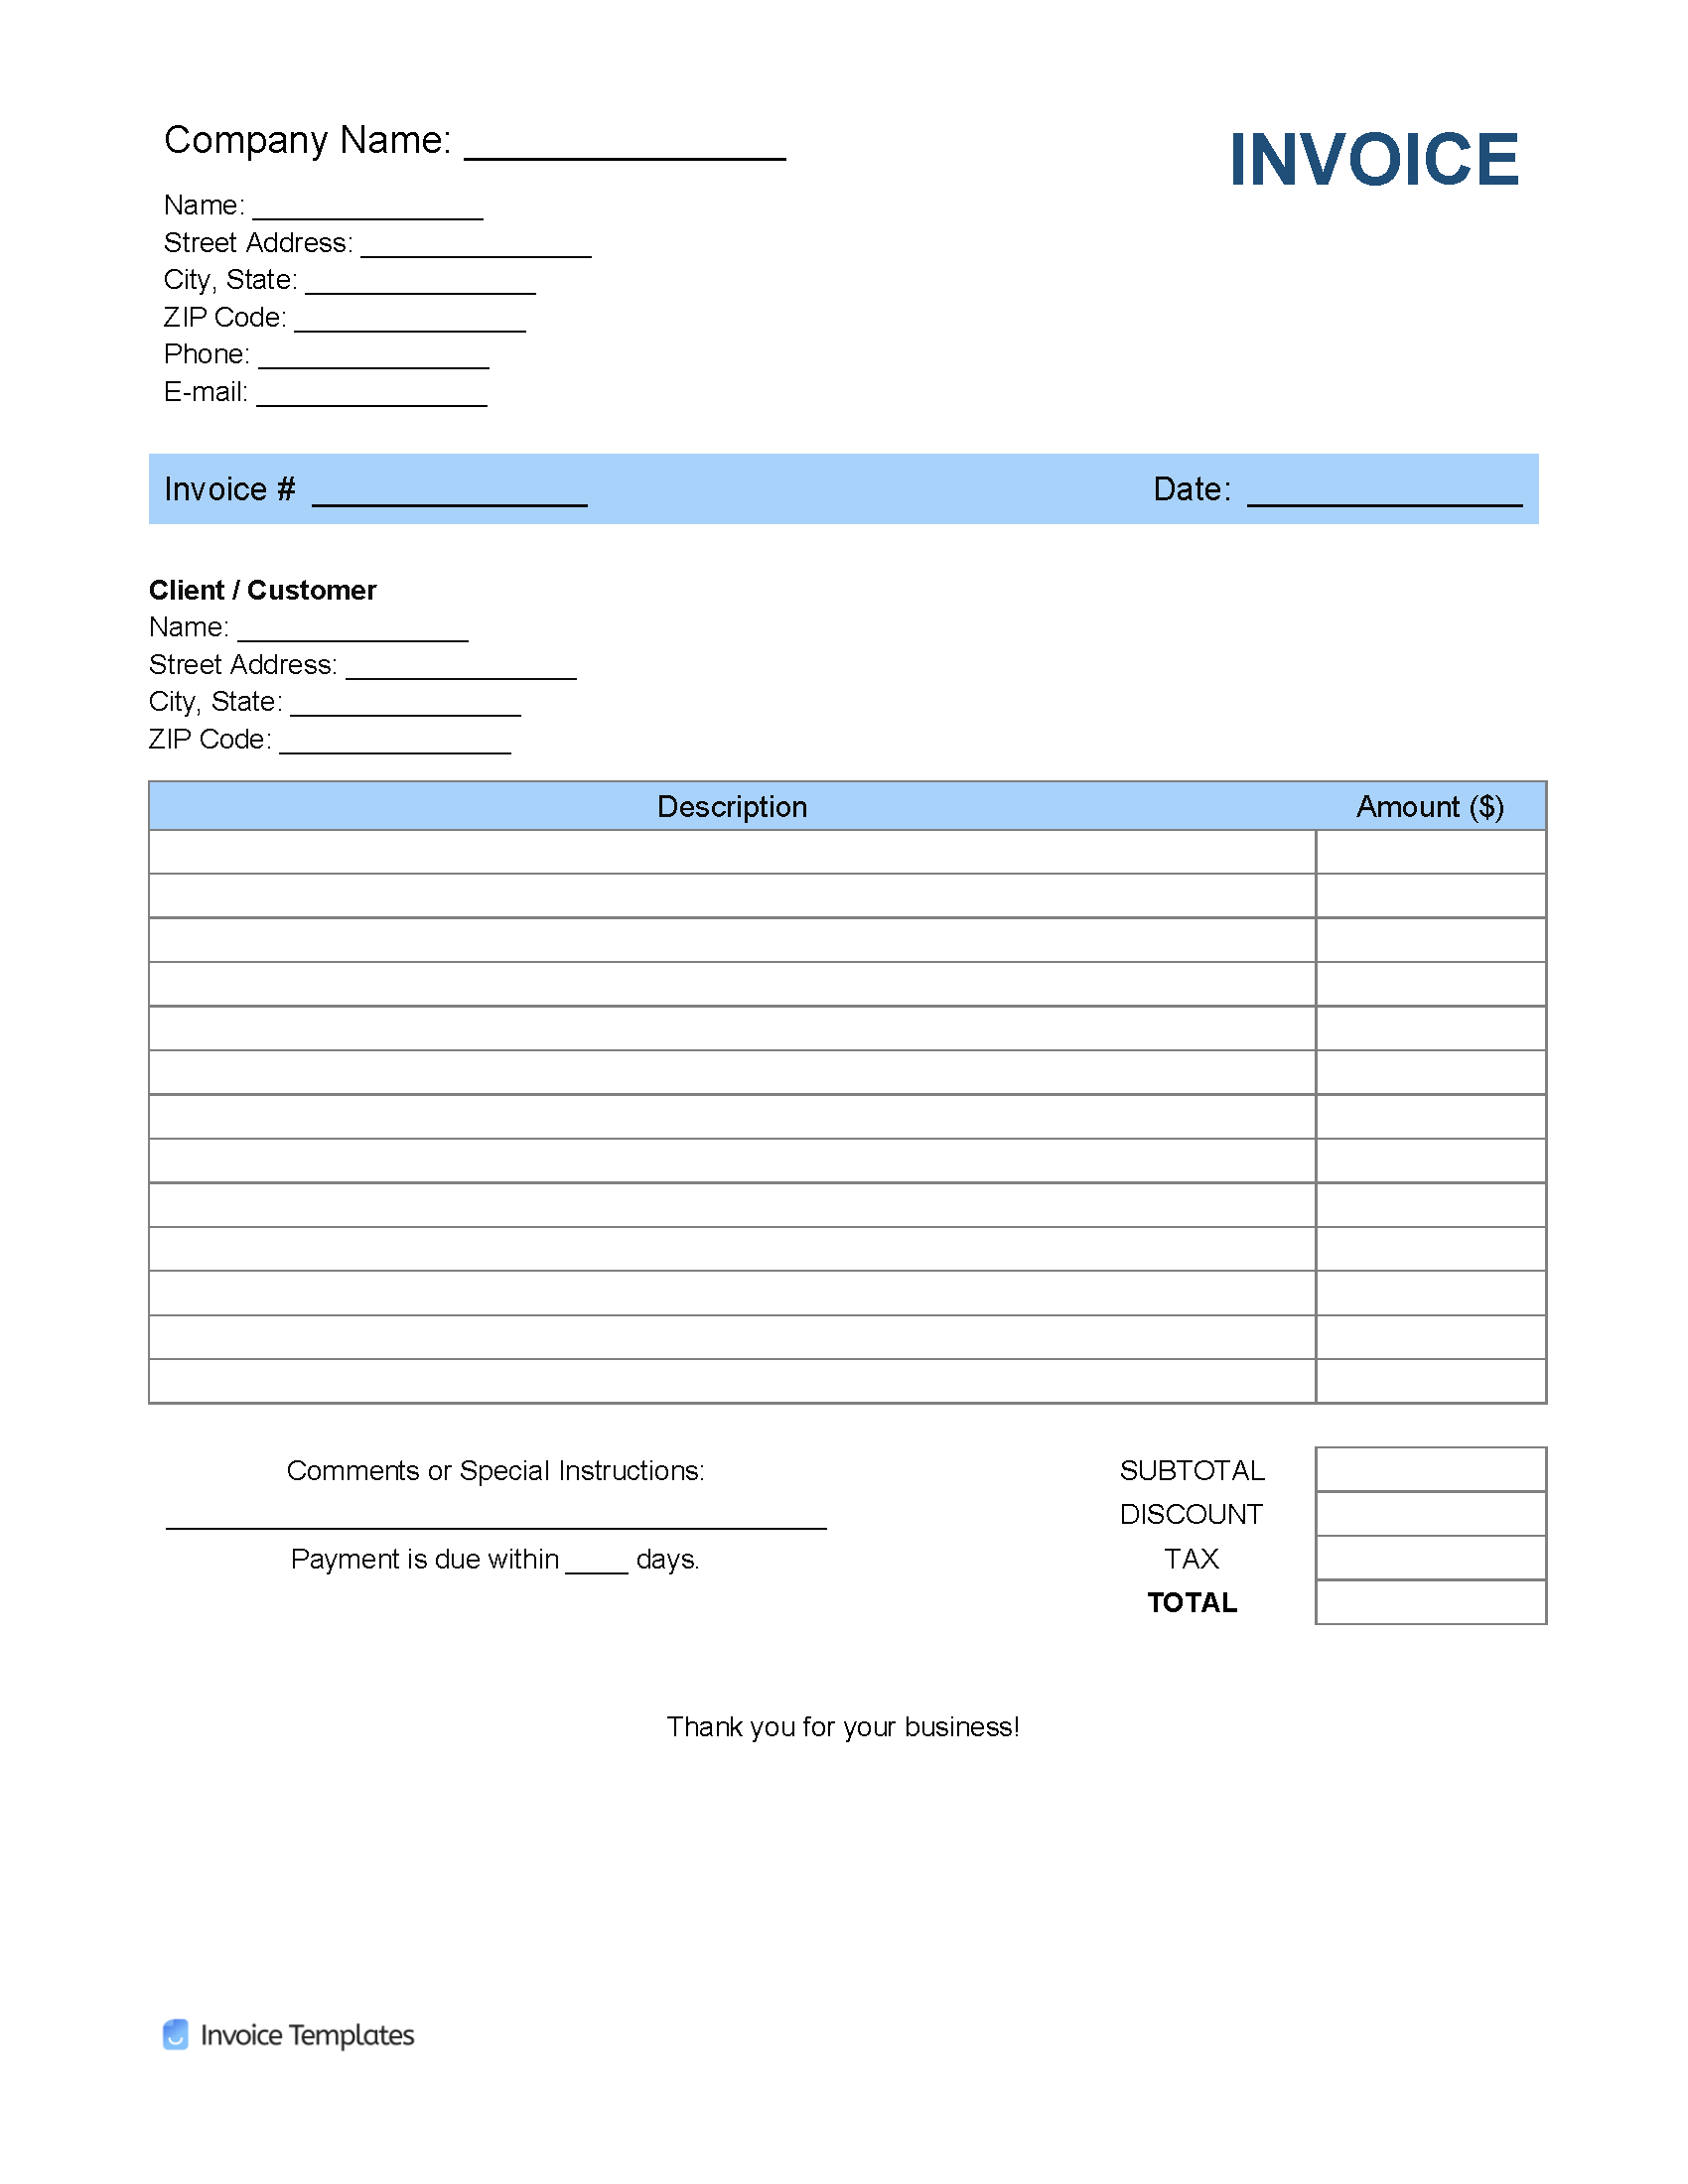 Free Blank Invoice Templates In Pdf Word Excel